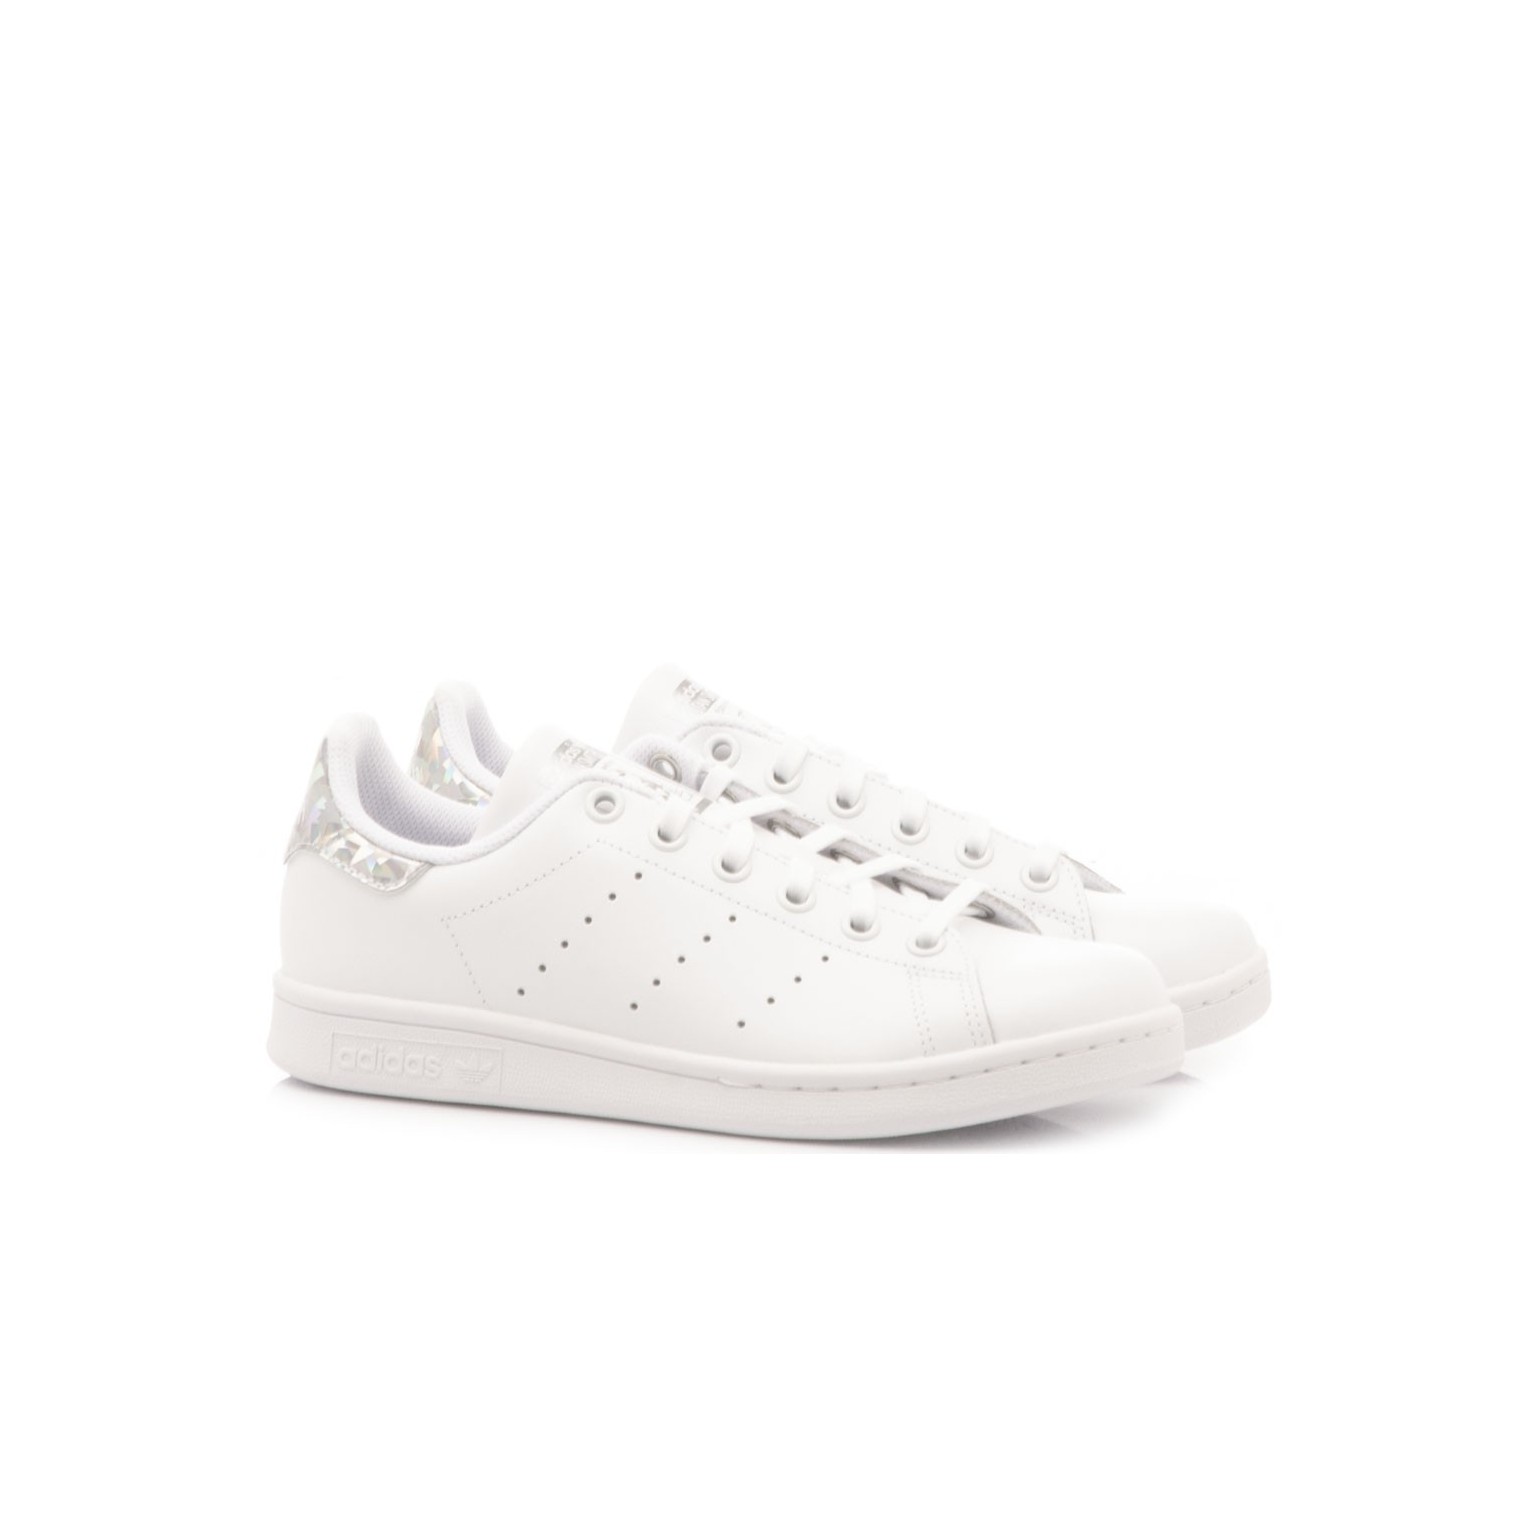 stan smith ee8483